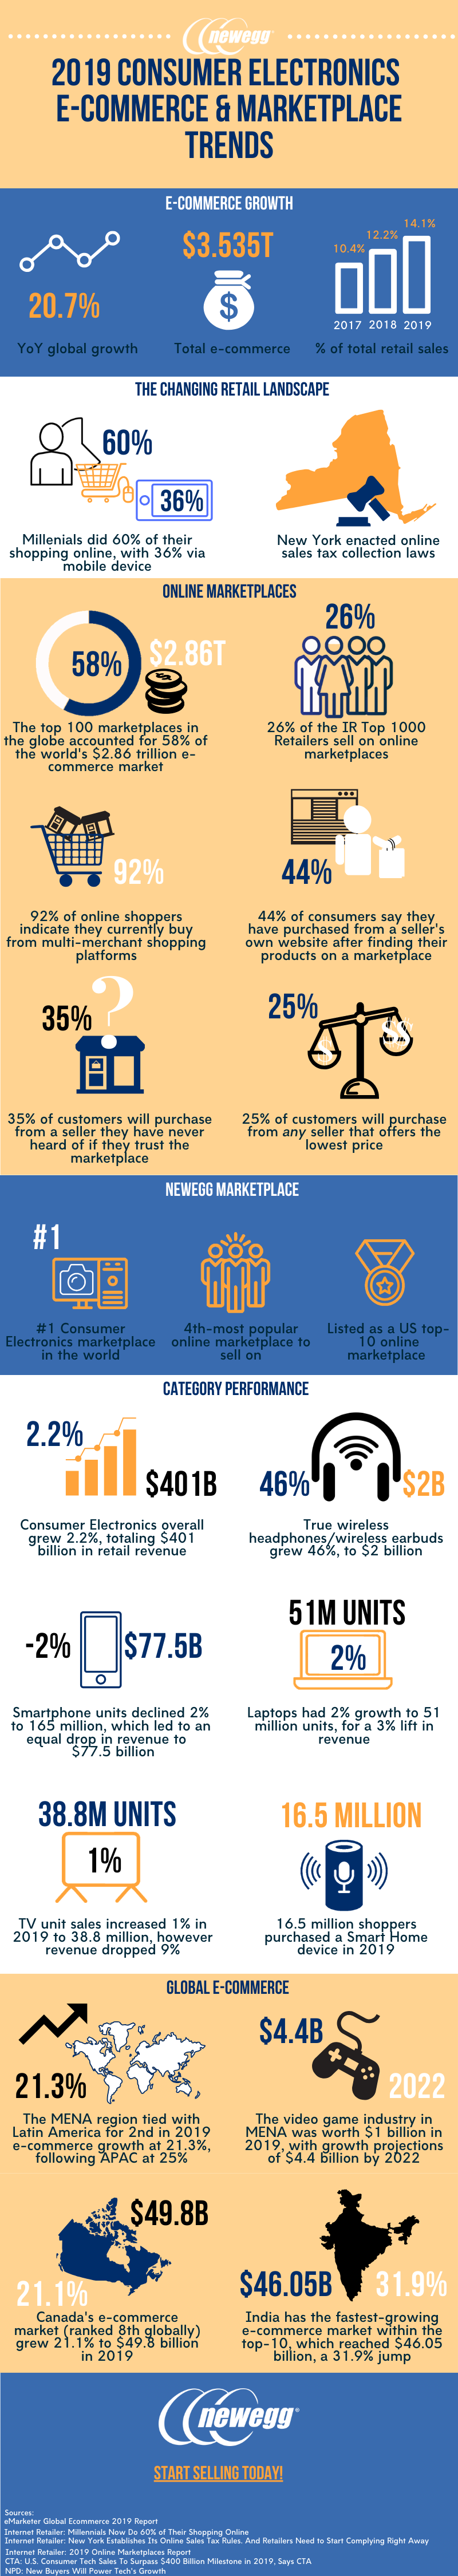 Consumer Electronics industry statistics for 2019 showing growth trends, online marketplace information, and key opportunities for sellers.